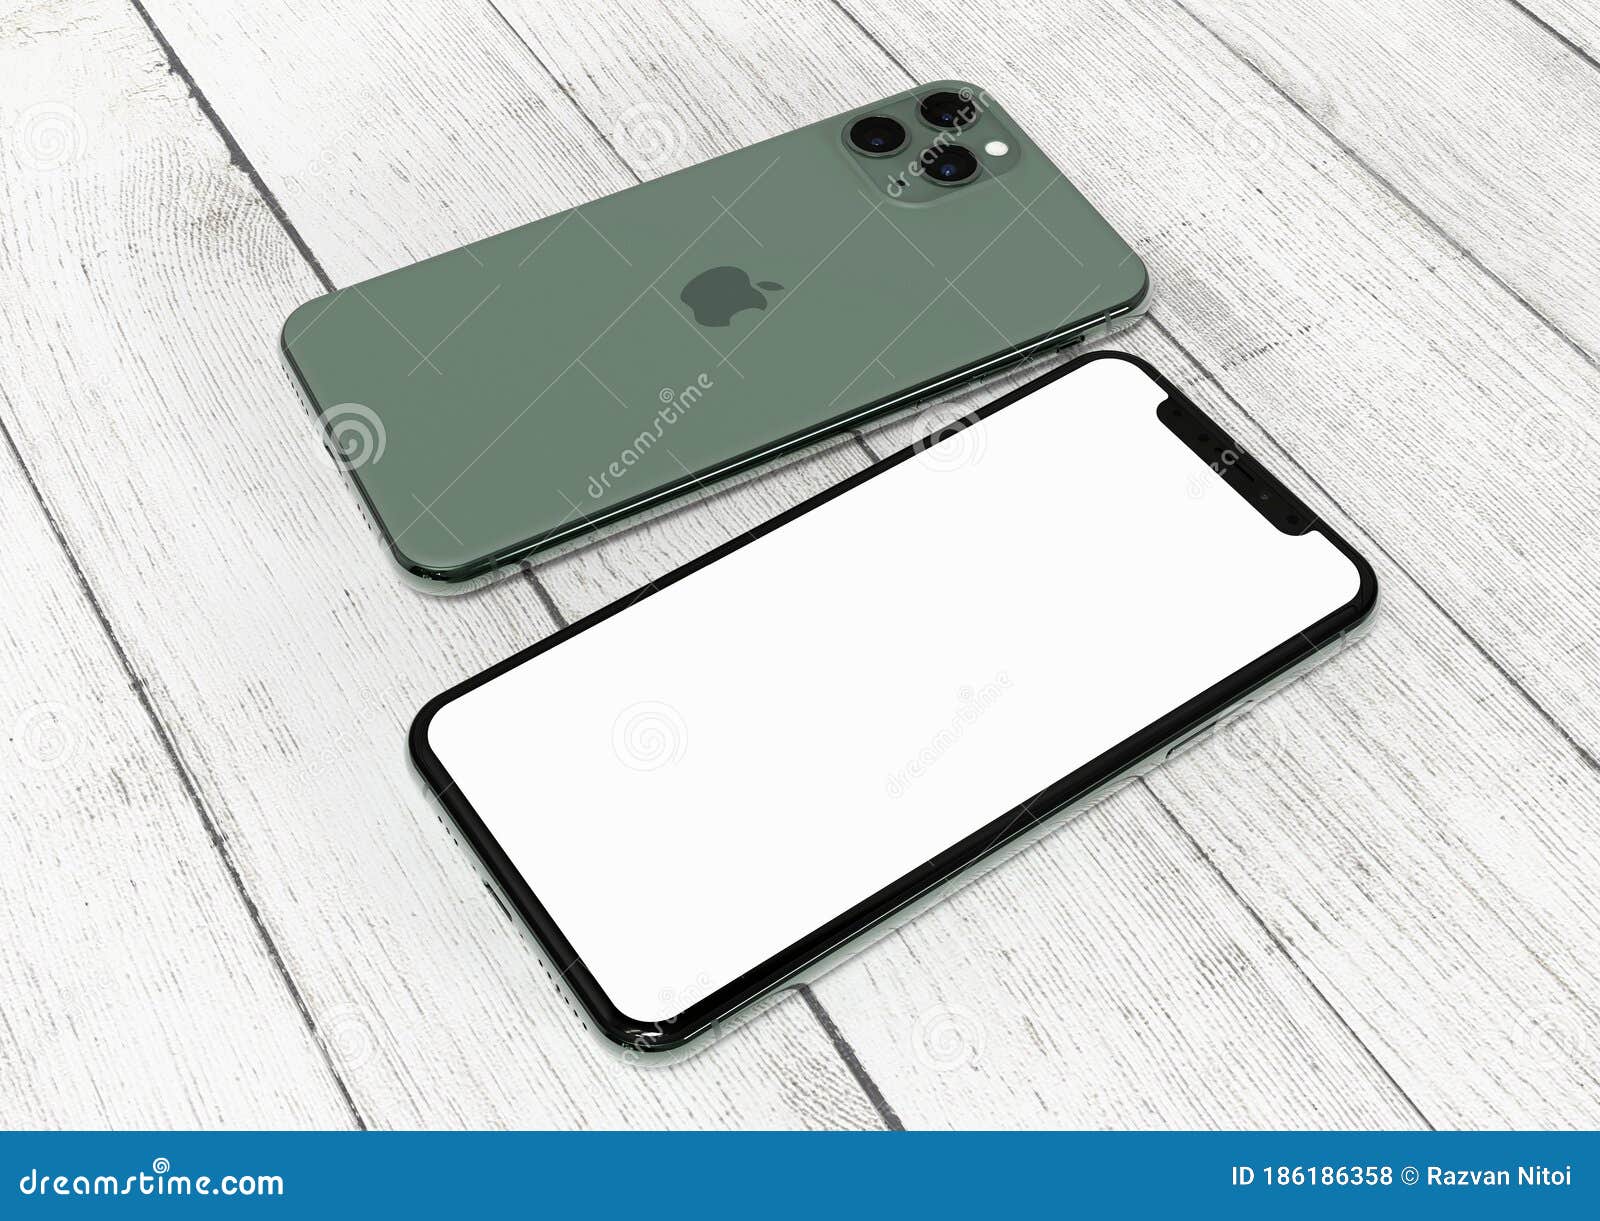 Apple Iphone 11 Pro Midnight Green Front And Back Sides Editorial Stock Photo Image Of Design Device